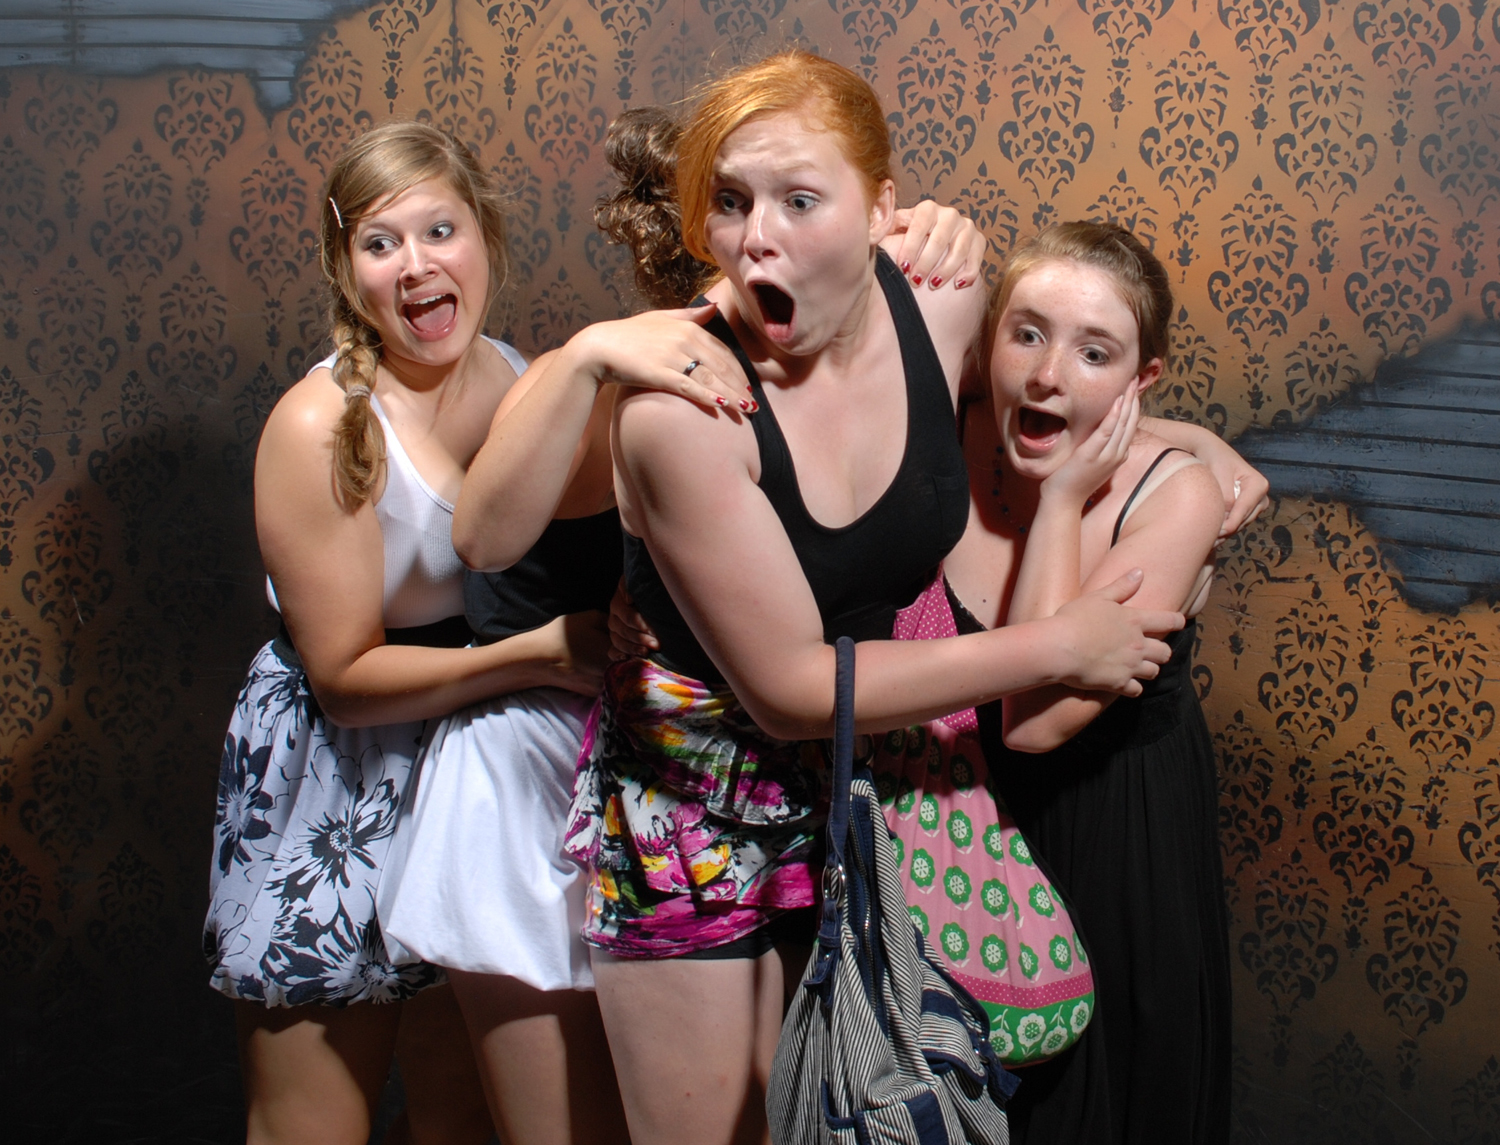 Faces of fear: 34 amazing haunted house reactions